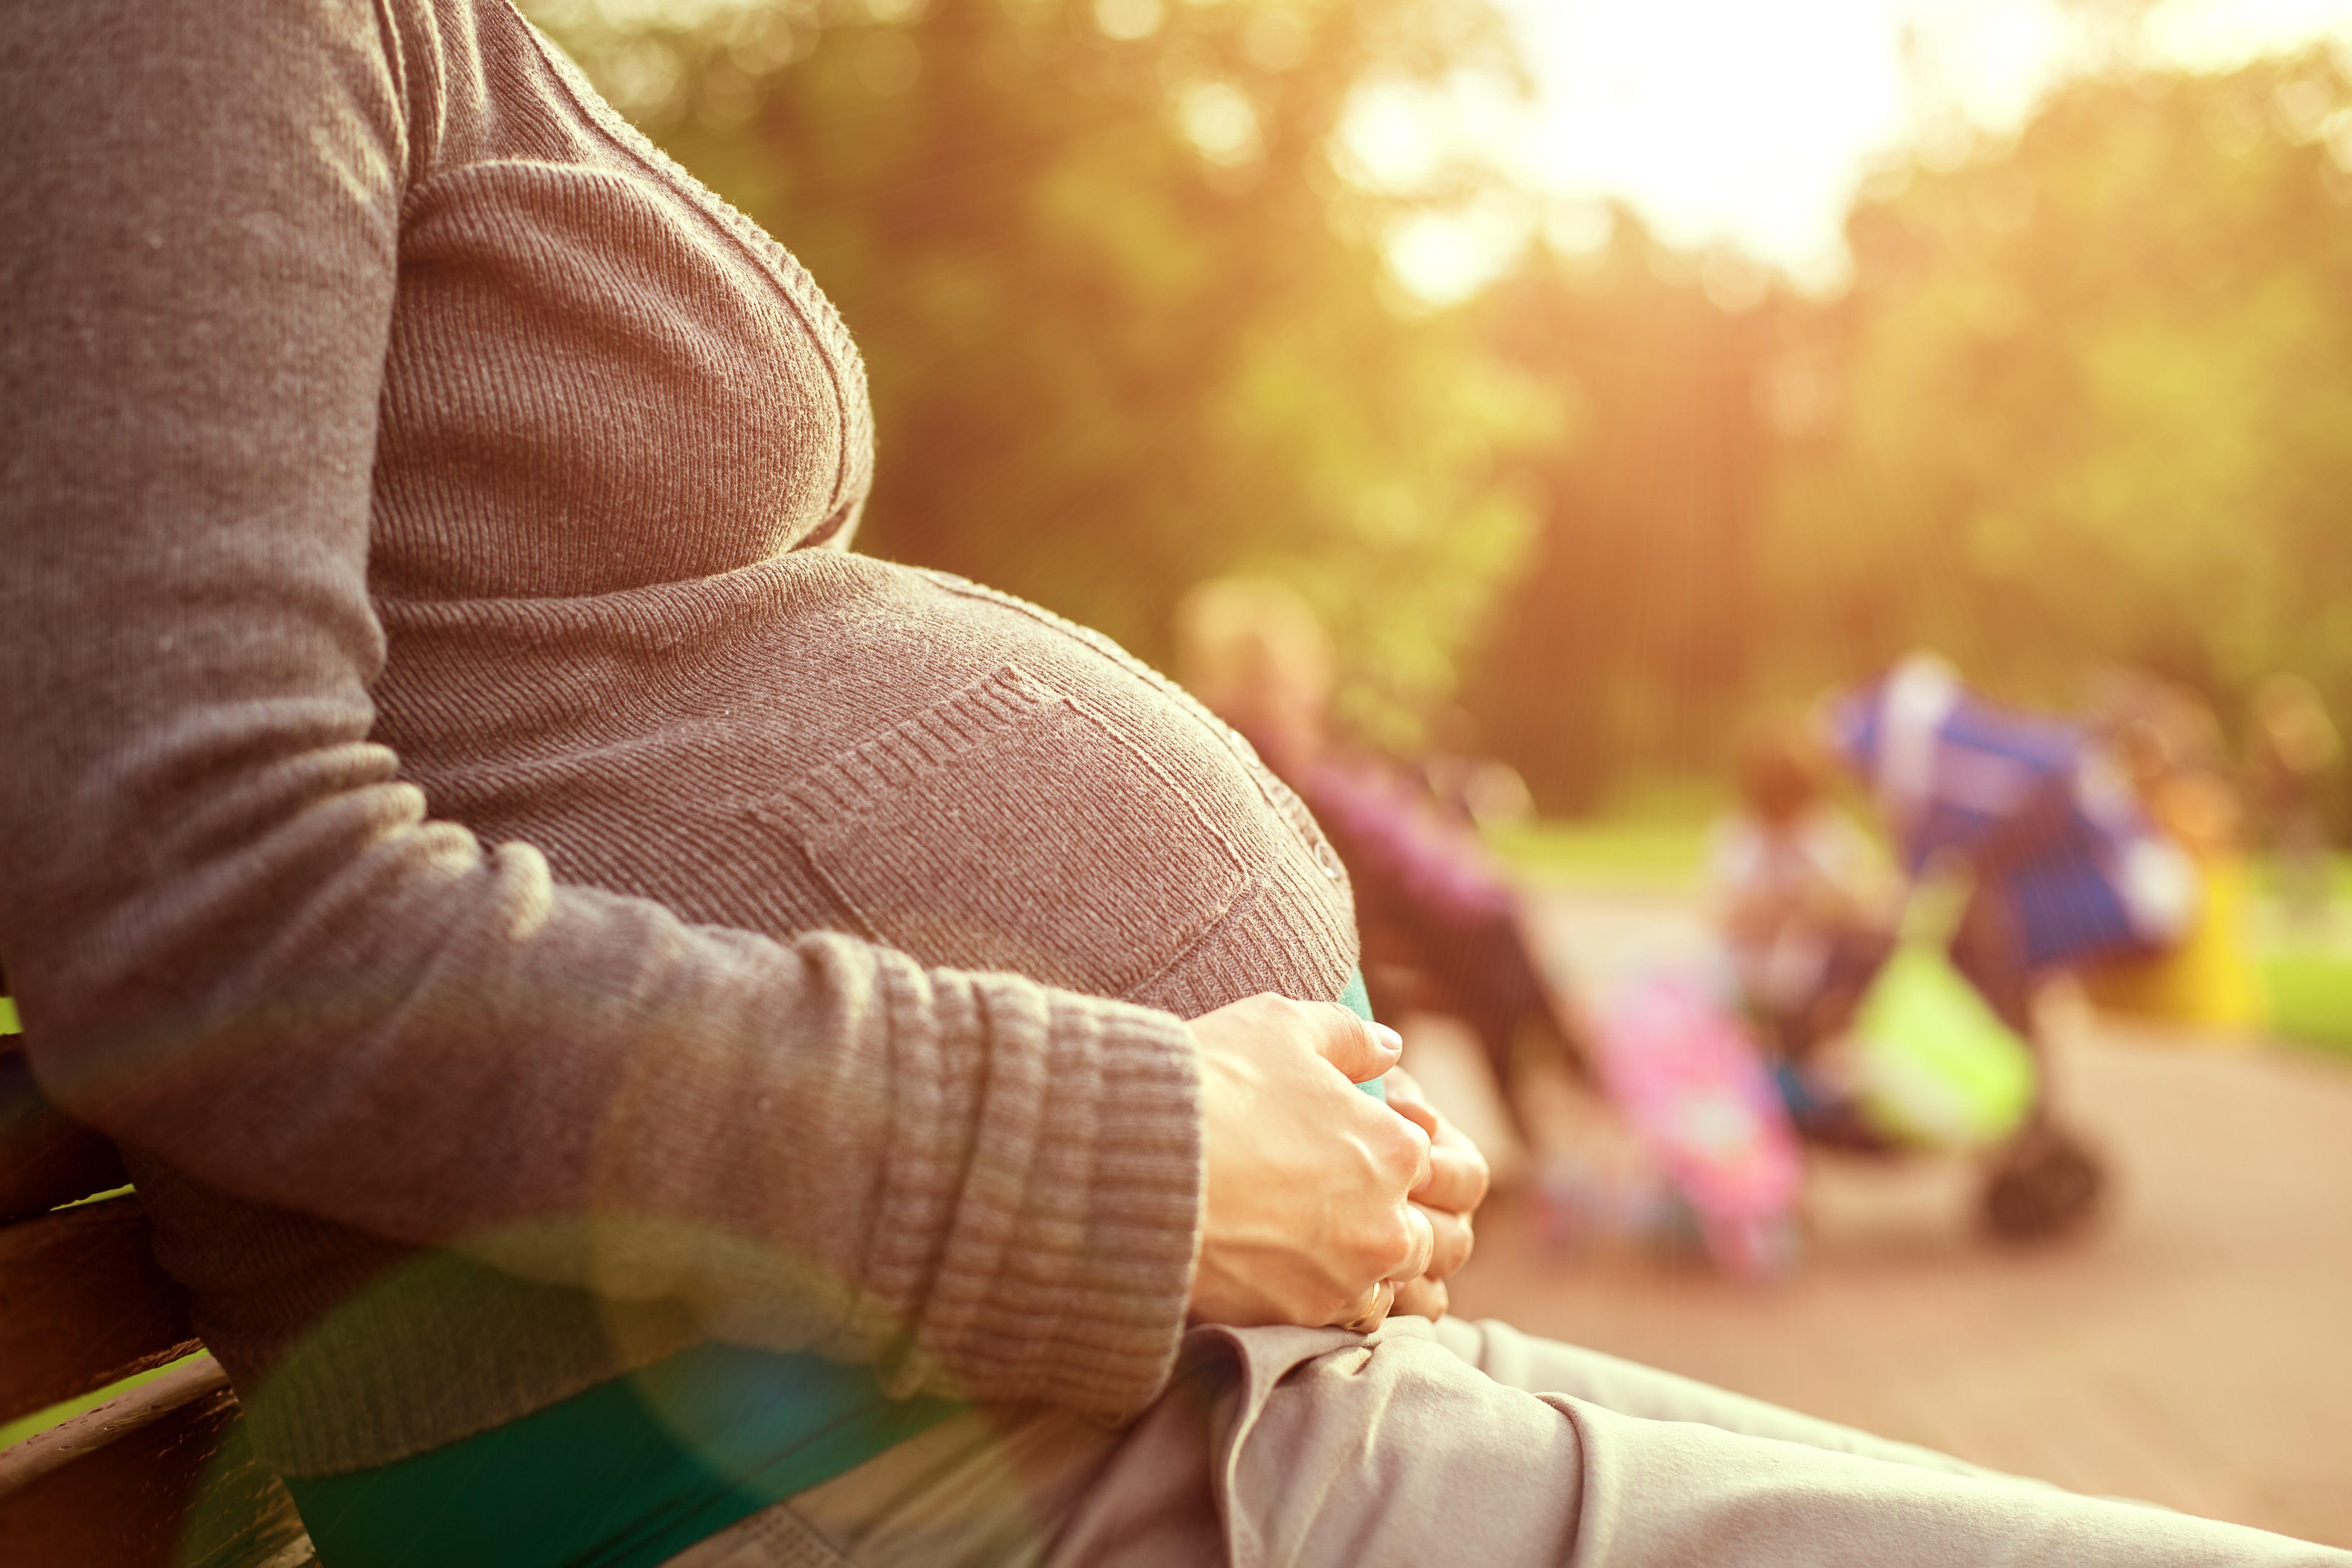 Pregnant woman sitting on a bench | Photo: Shutterstock